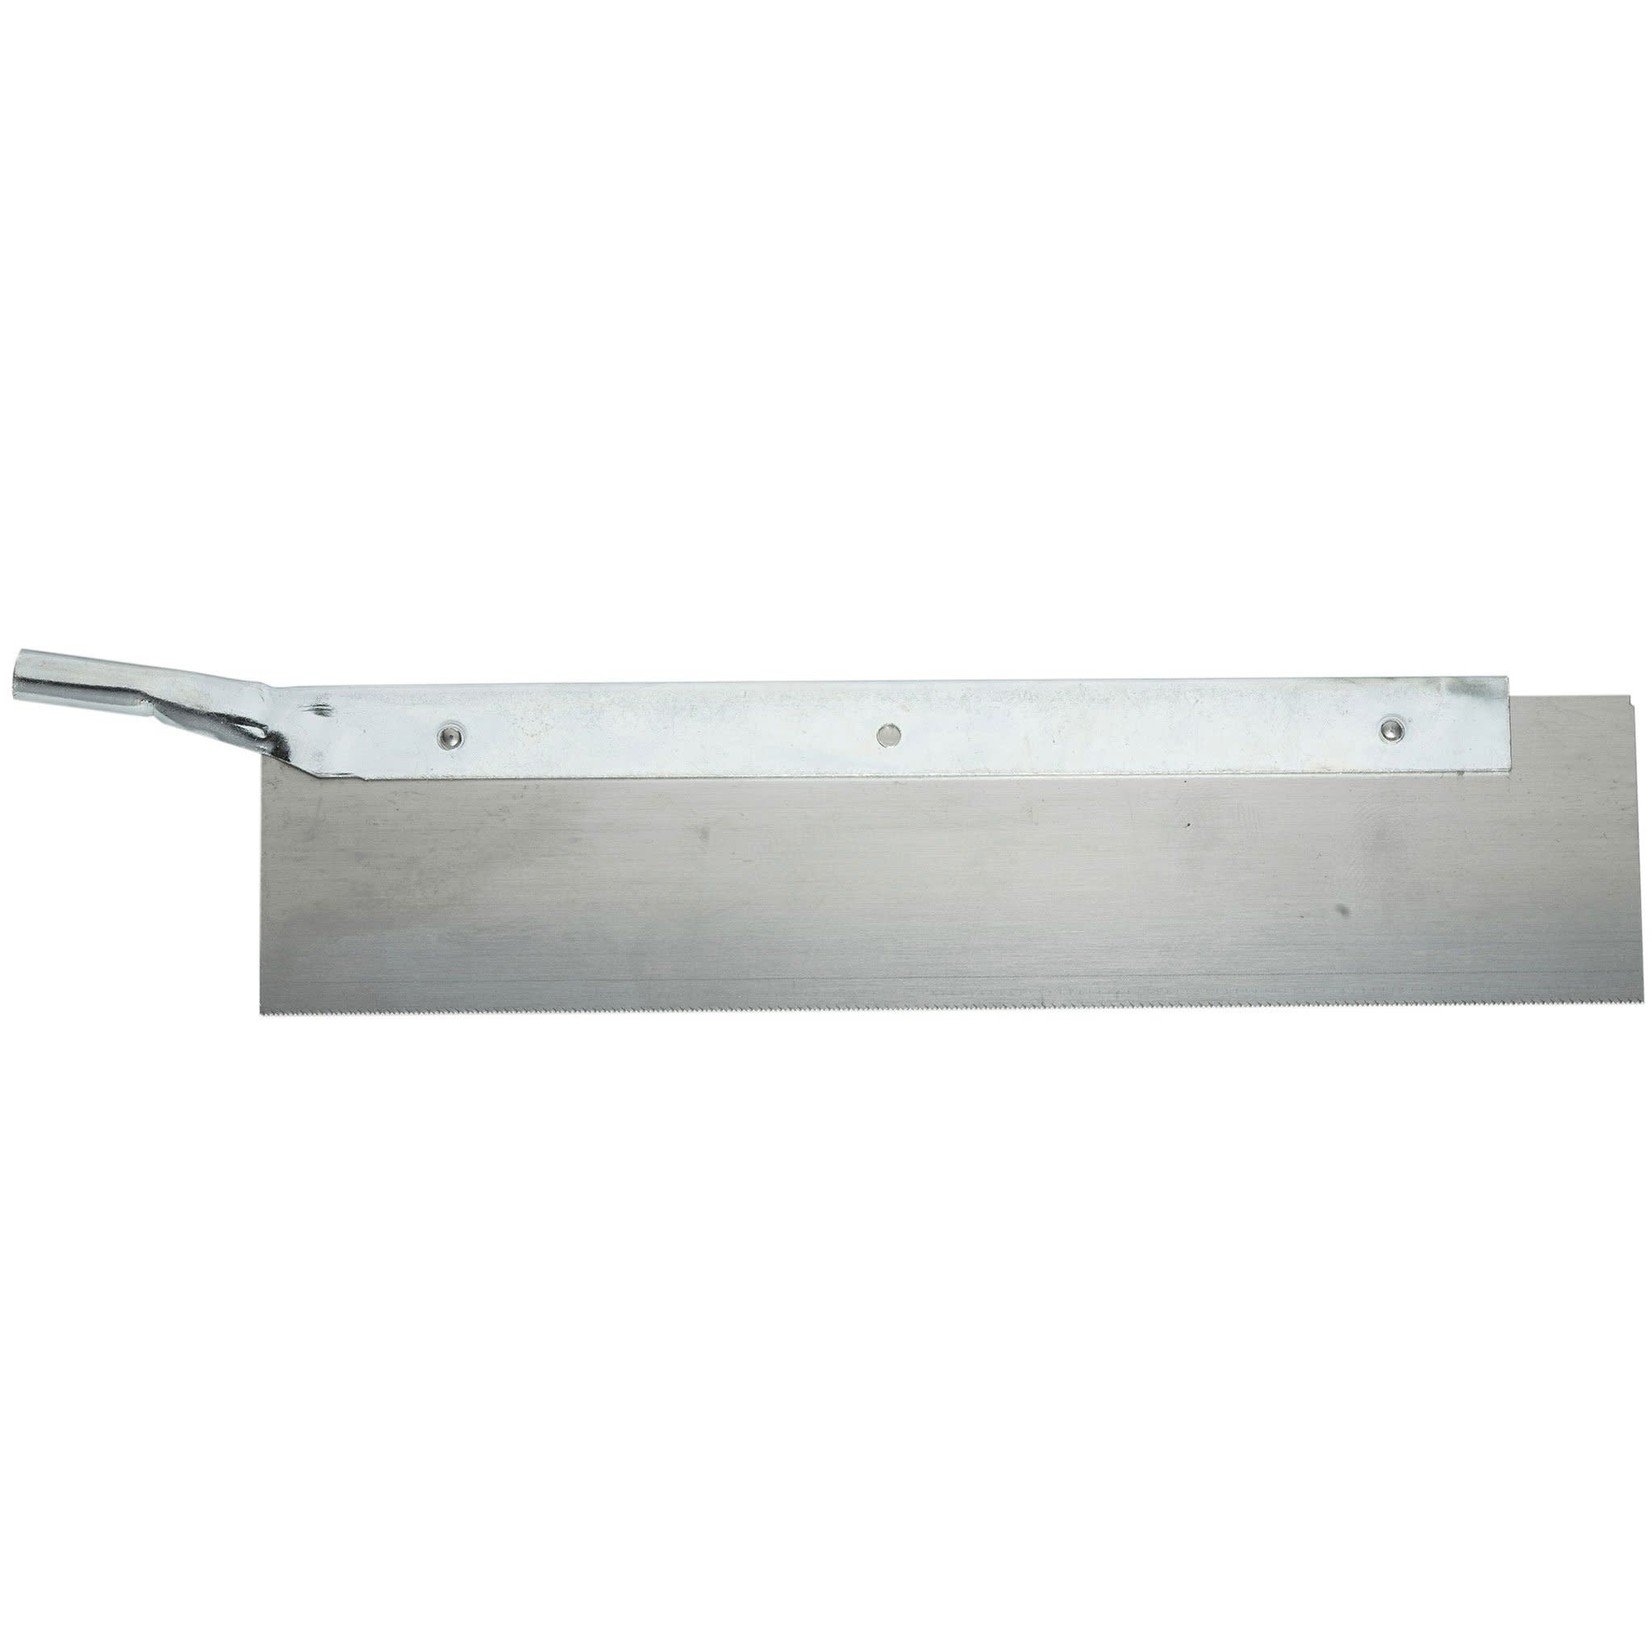 Pull-Out Saw Blade, 1.25" x 5 (54 Teeth)